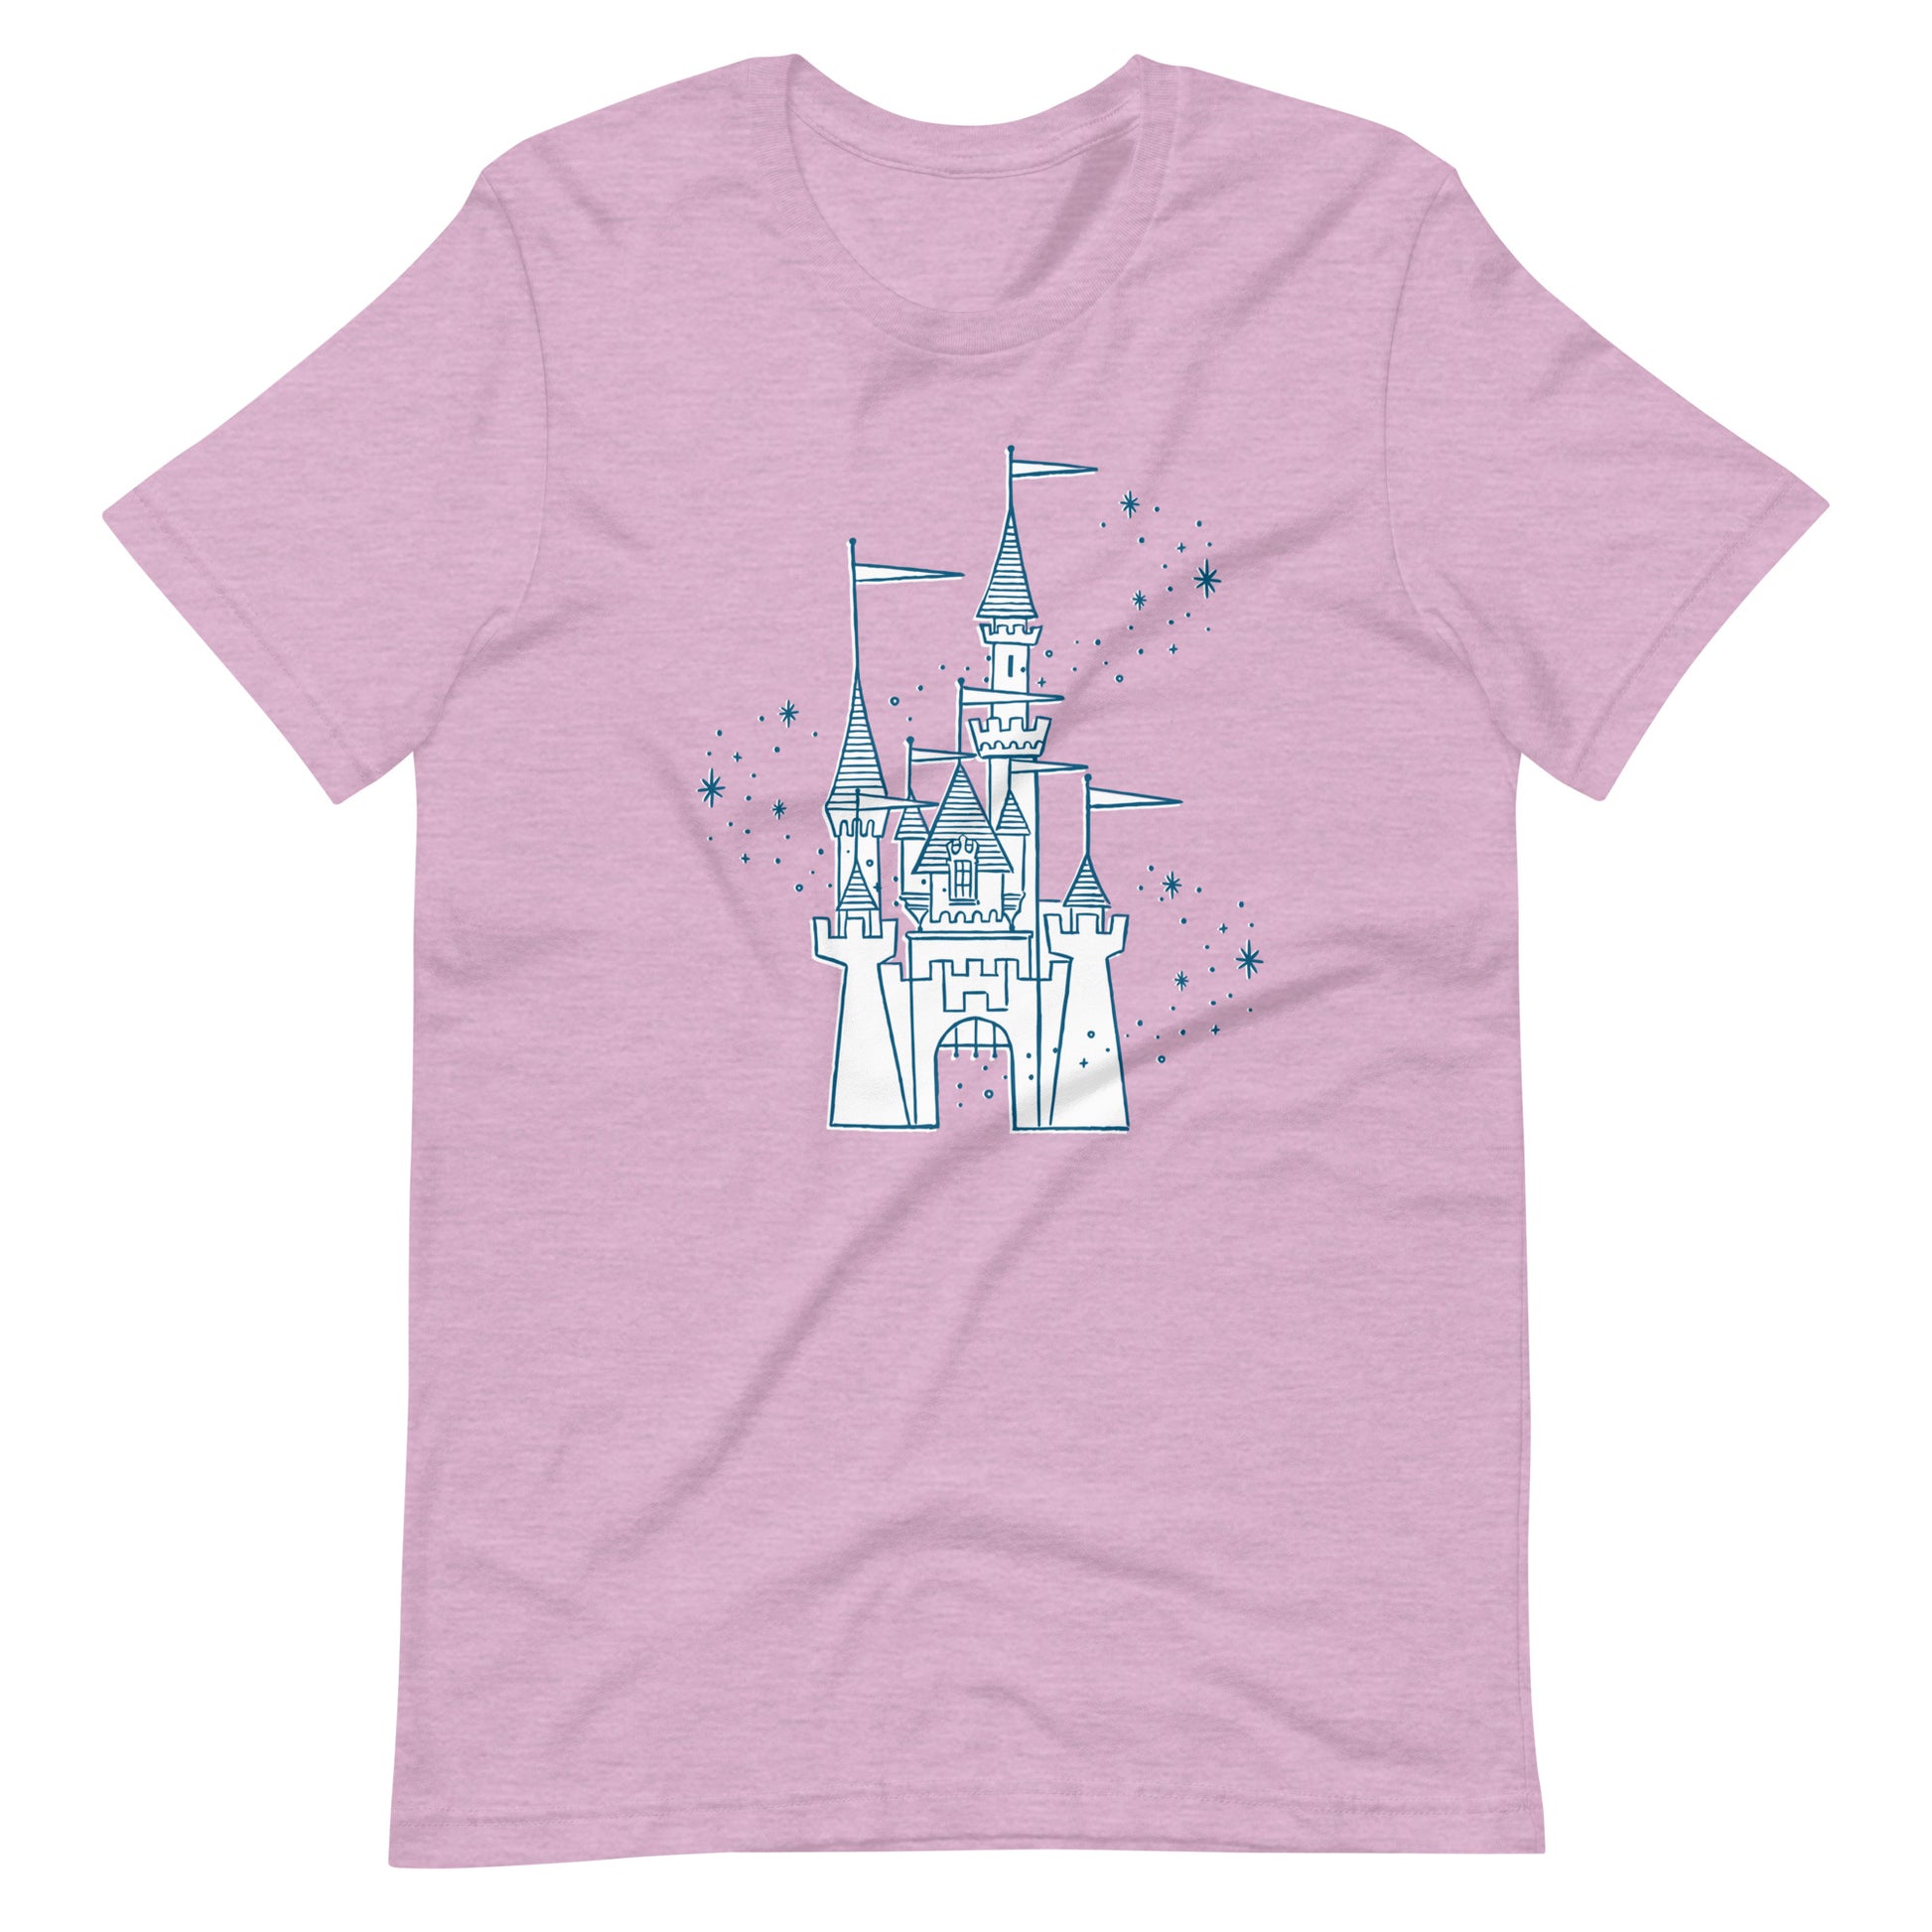 Purple shirt printed with vintage style sketch of a castle and pixie dust around the castle.